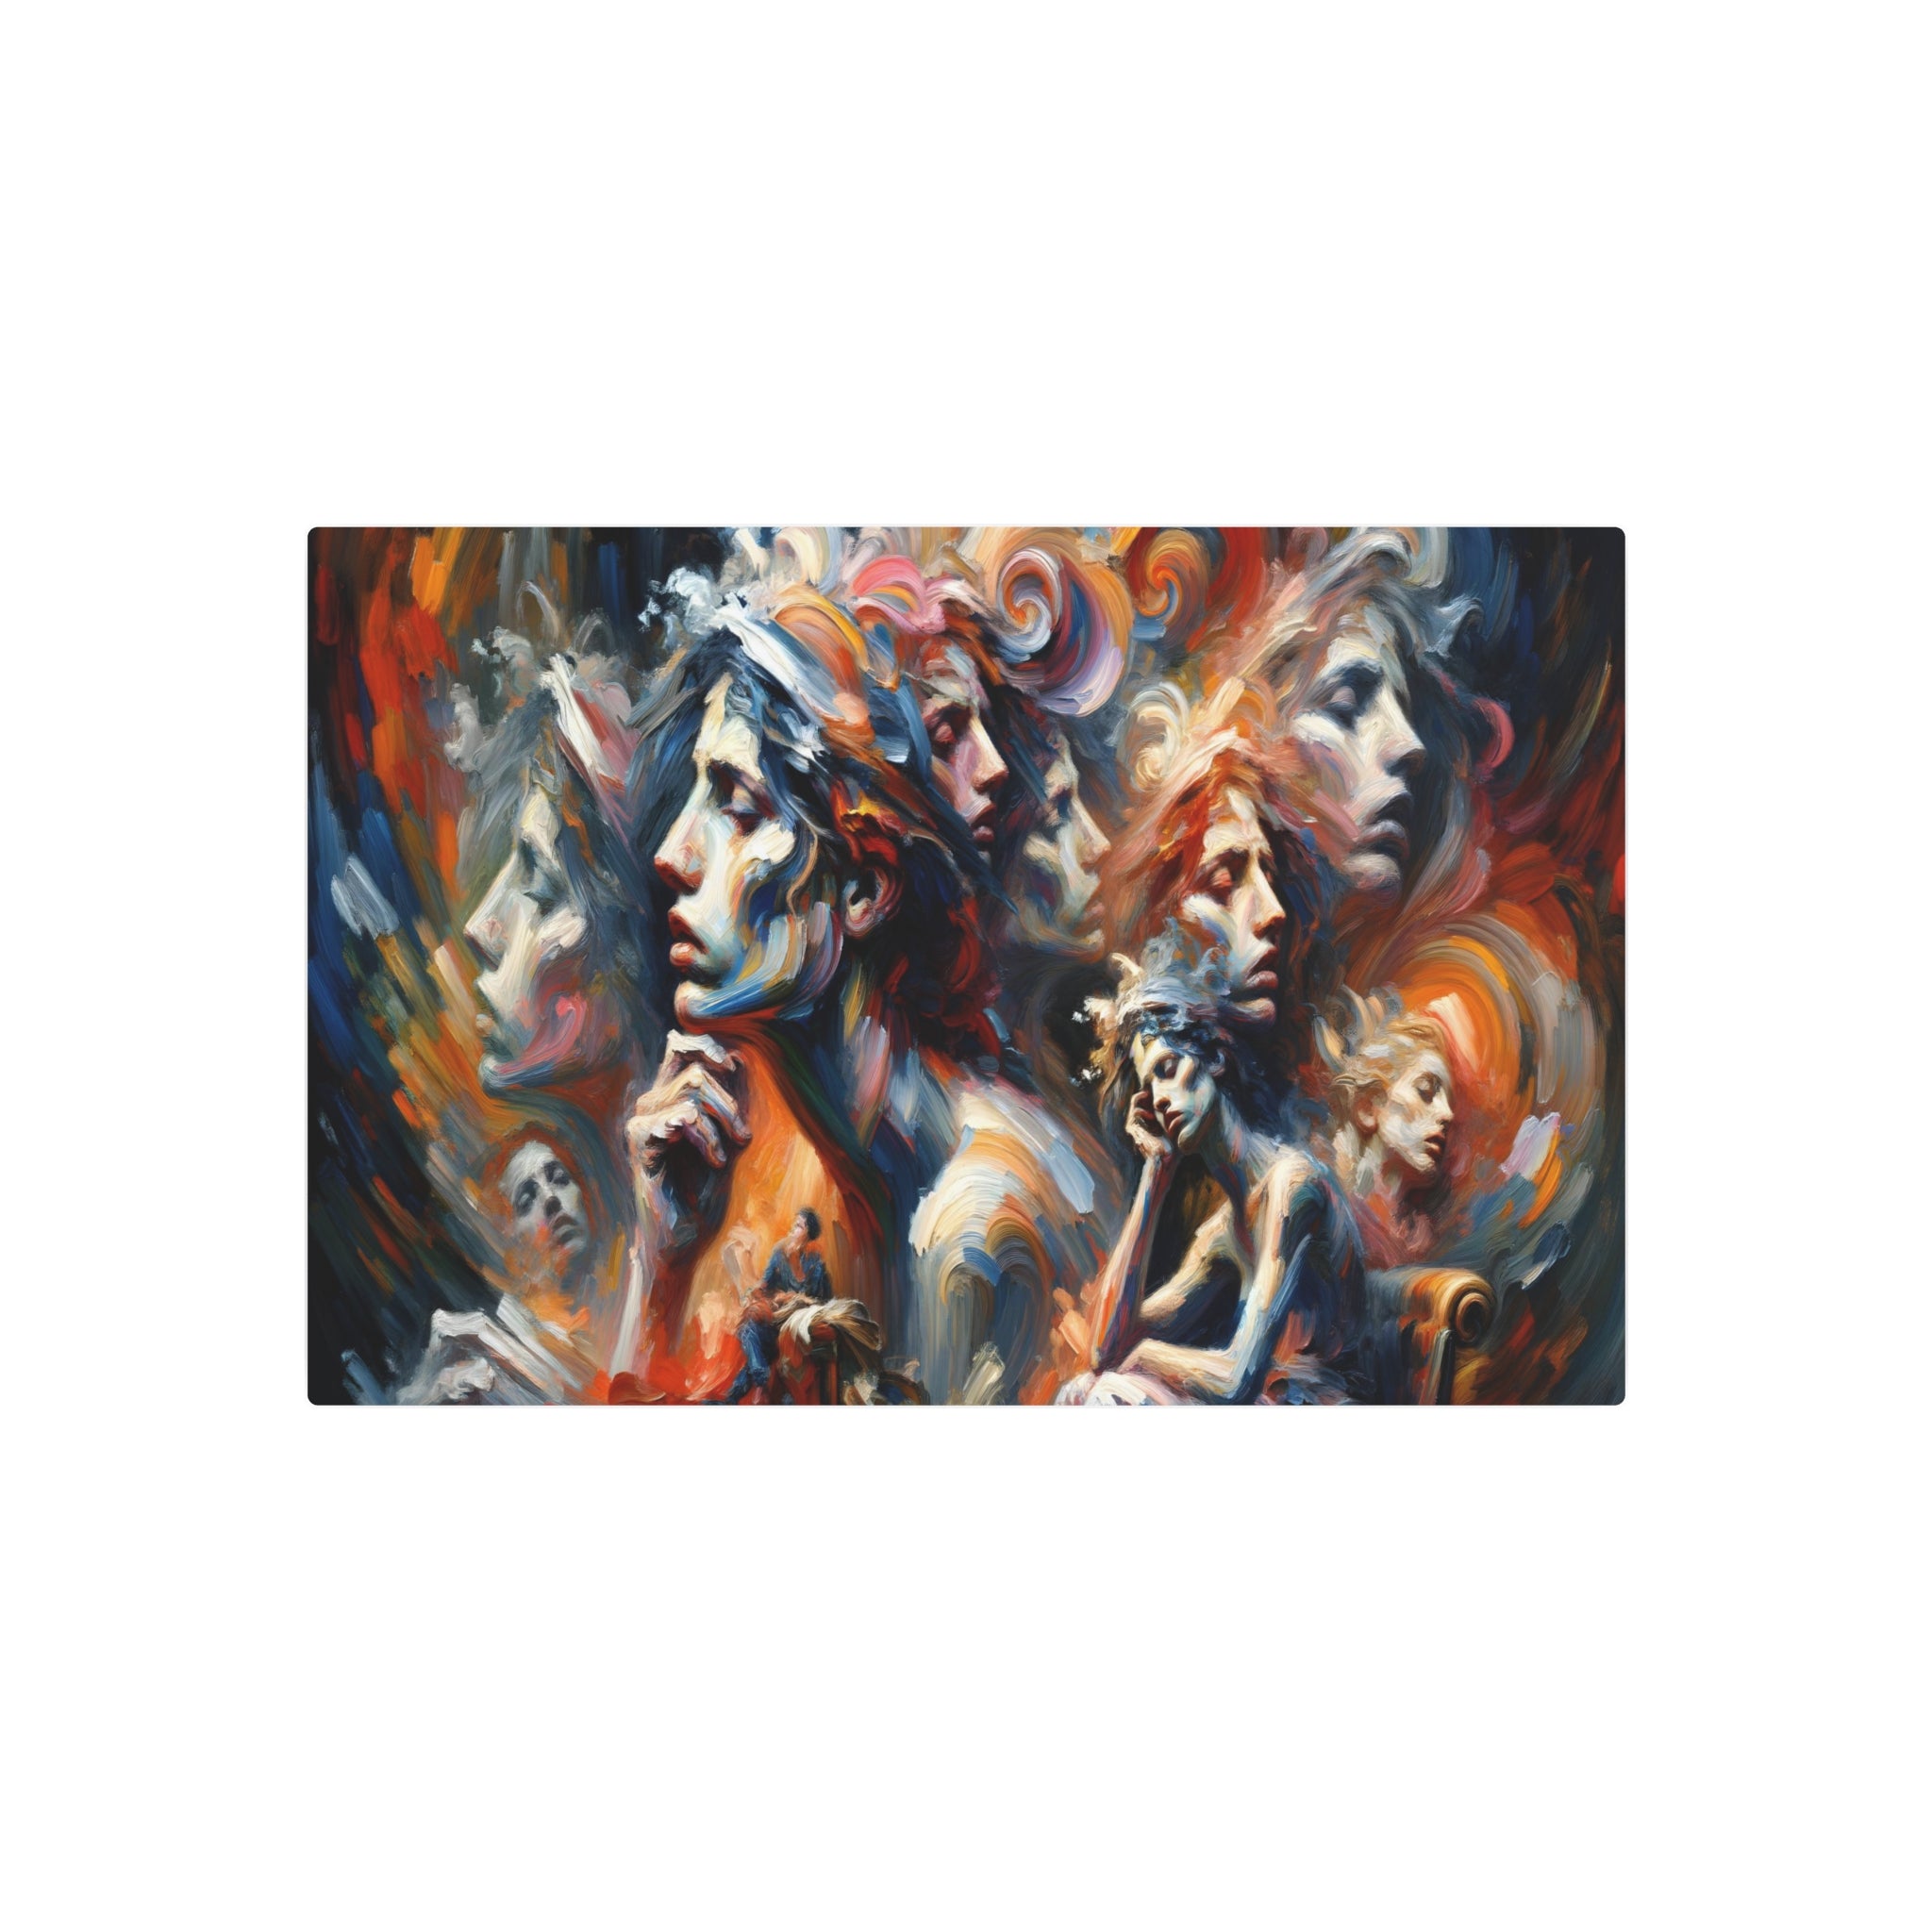 Metal Poster Art | "Bold and Dramatic Expressionism Art Image - Western Art Styles, Distorted Forms & Exaggerated Reality with Prominent Brush Strokes"